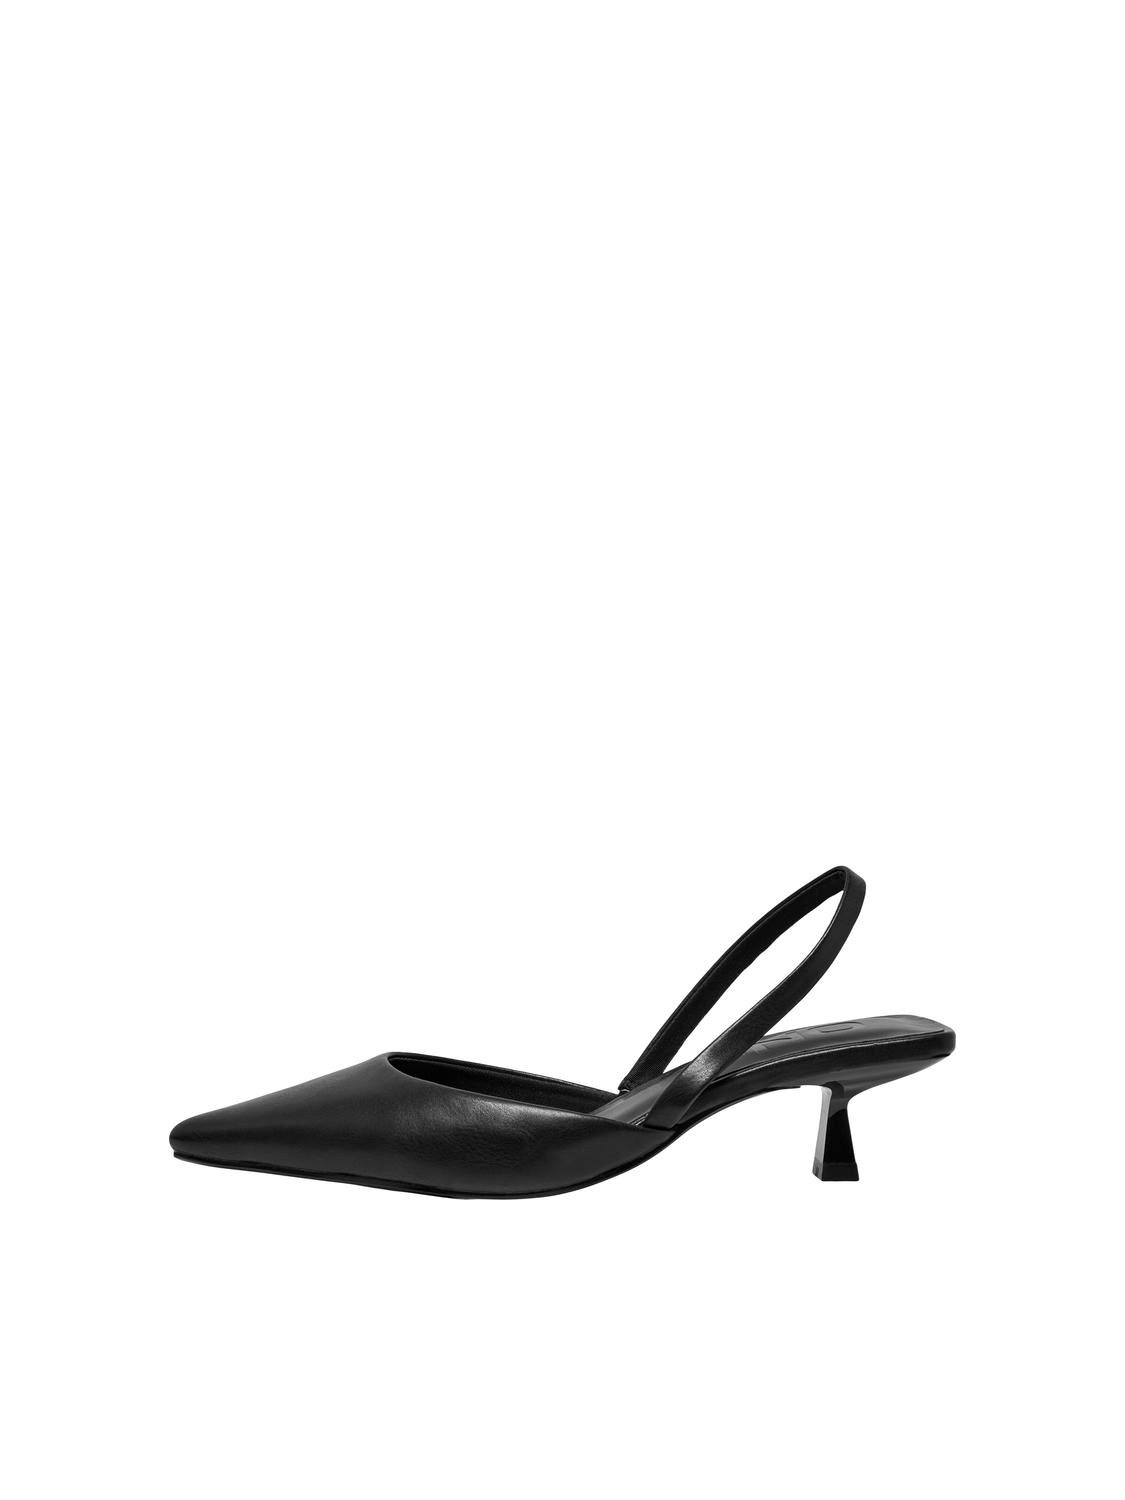 ONLY Heels with pointed toe -Black - 15288424